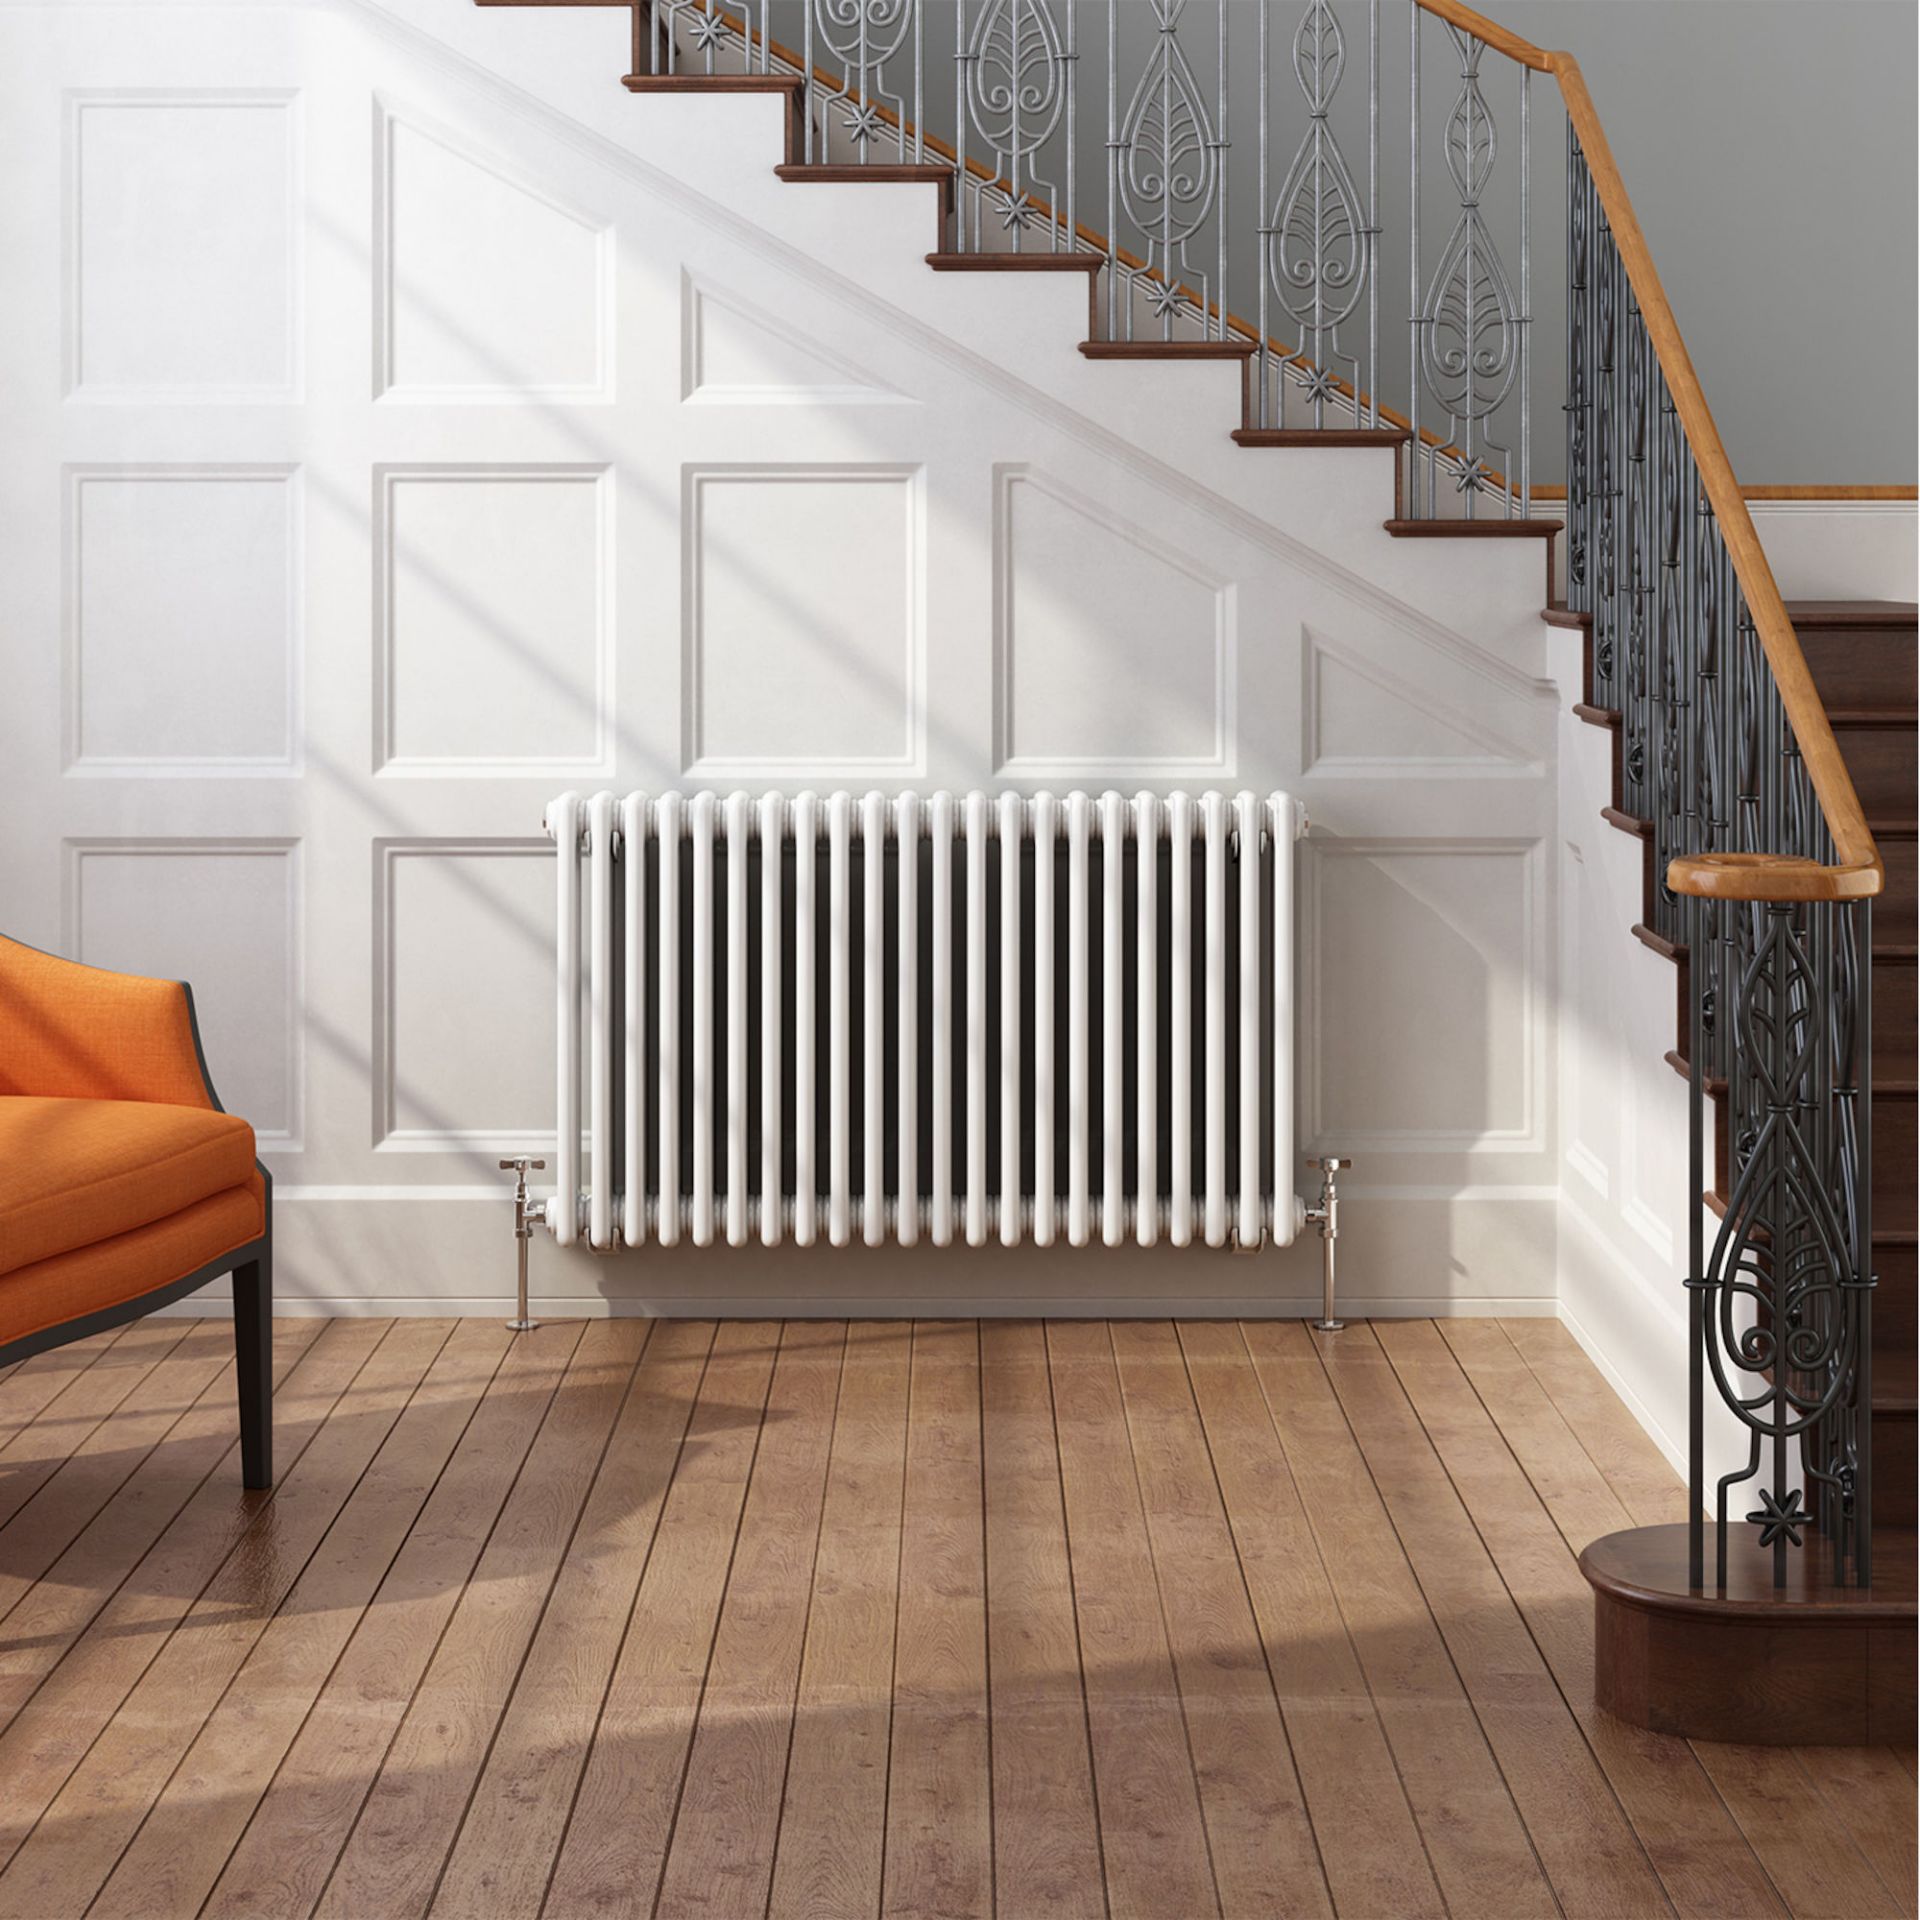 (AD17) 600x1008mm White Double Panel Horizontal Colosseum Traditional Radiator. RRP £430.99. Made